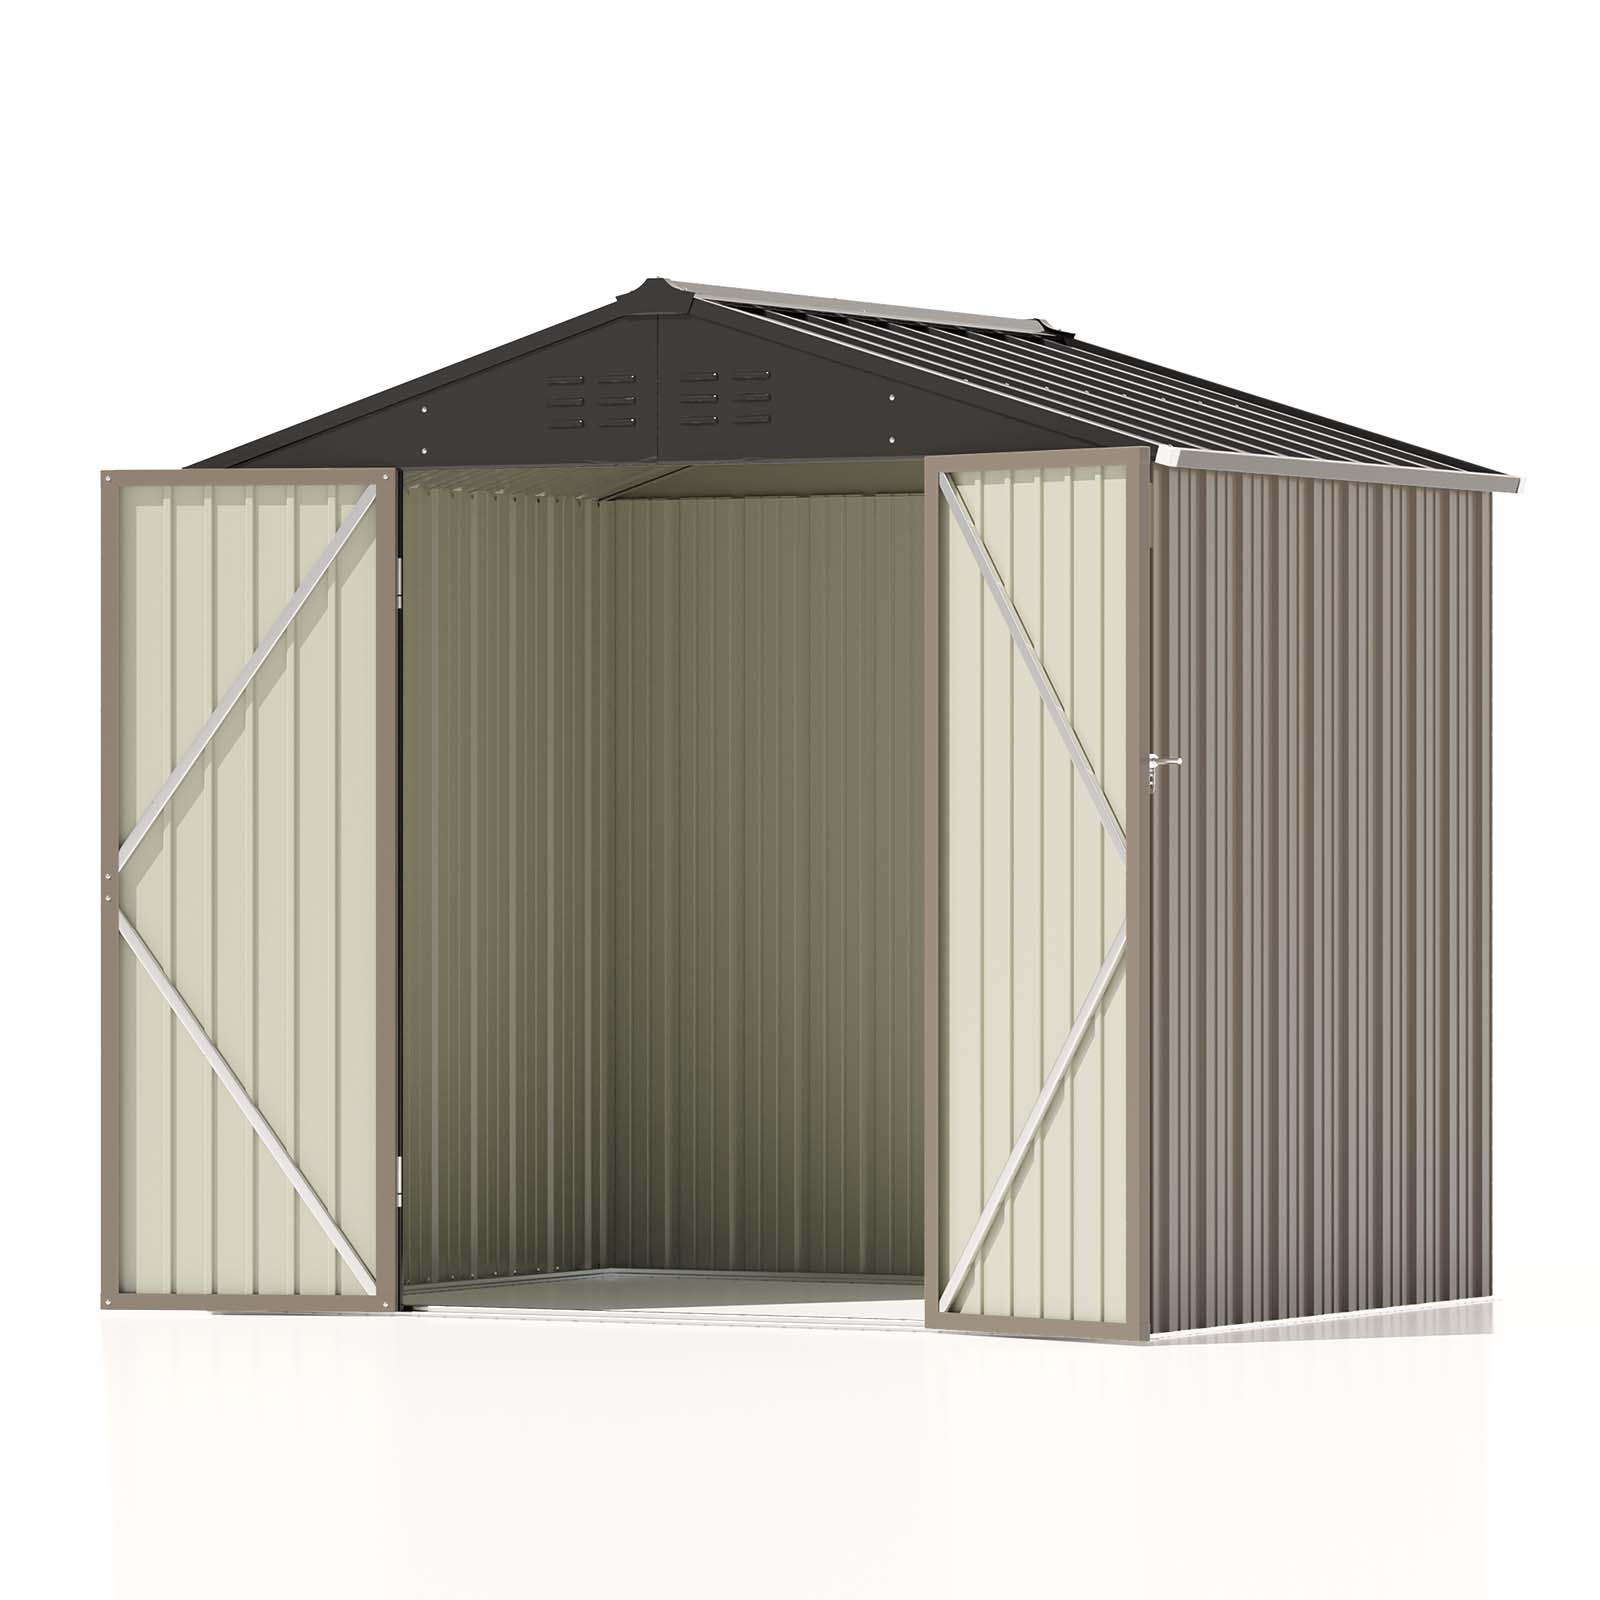 Patiowell 8x6 Metal Shed-2